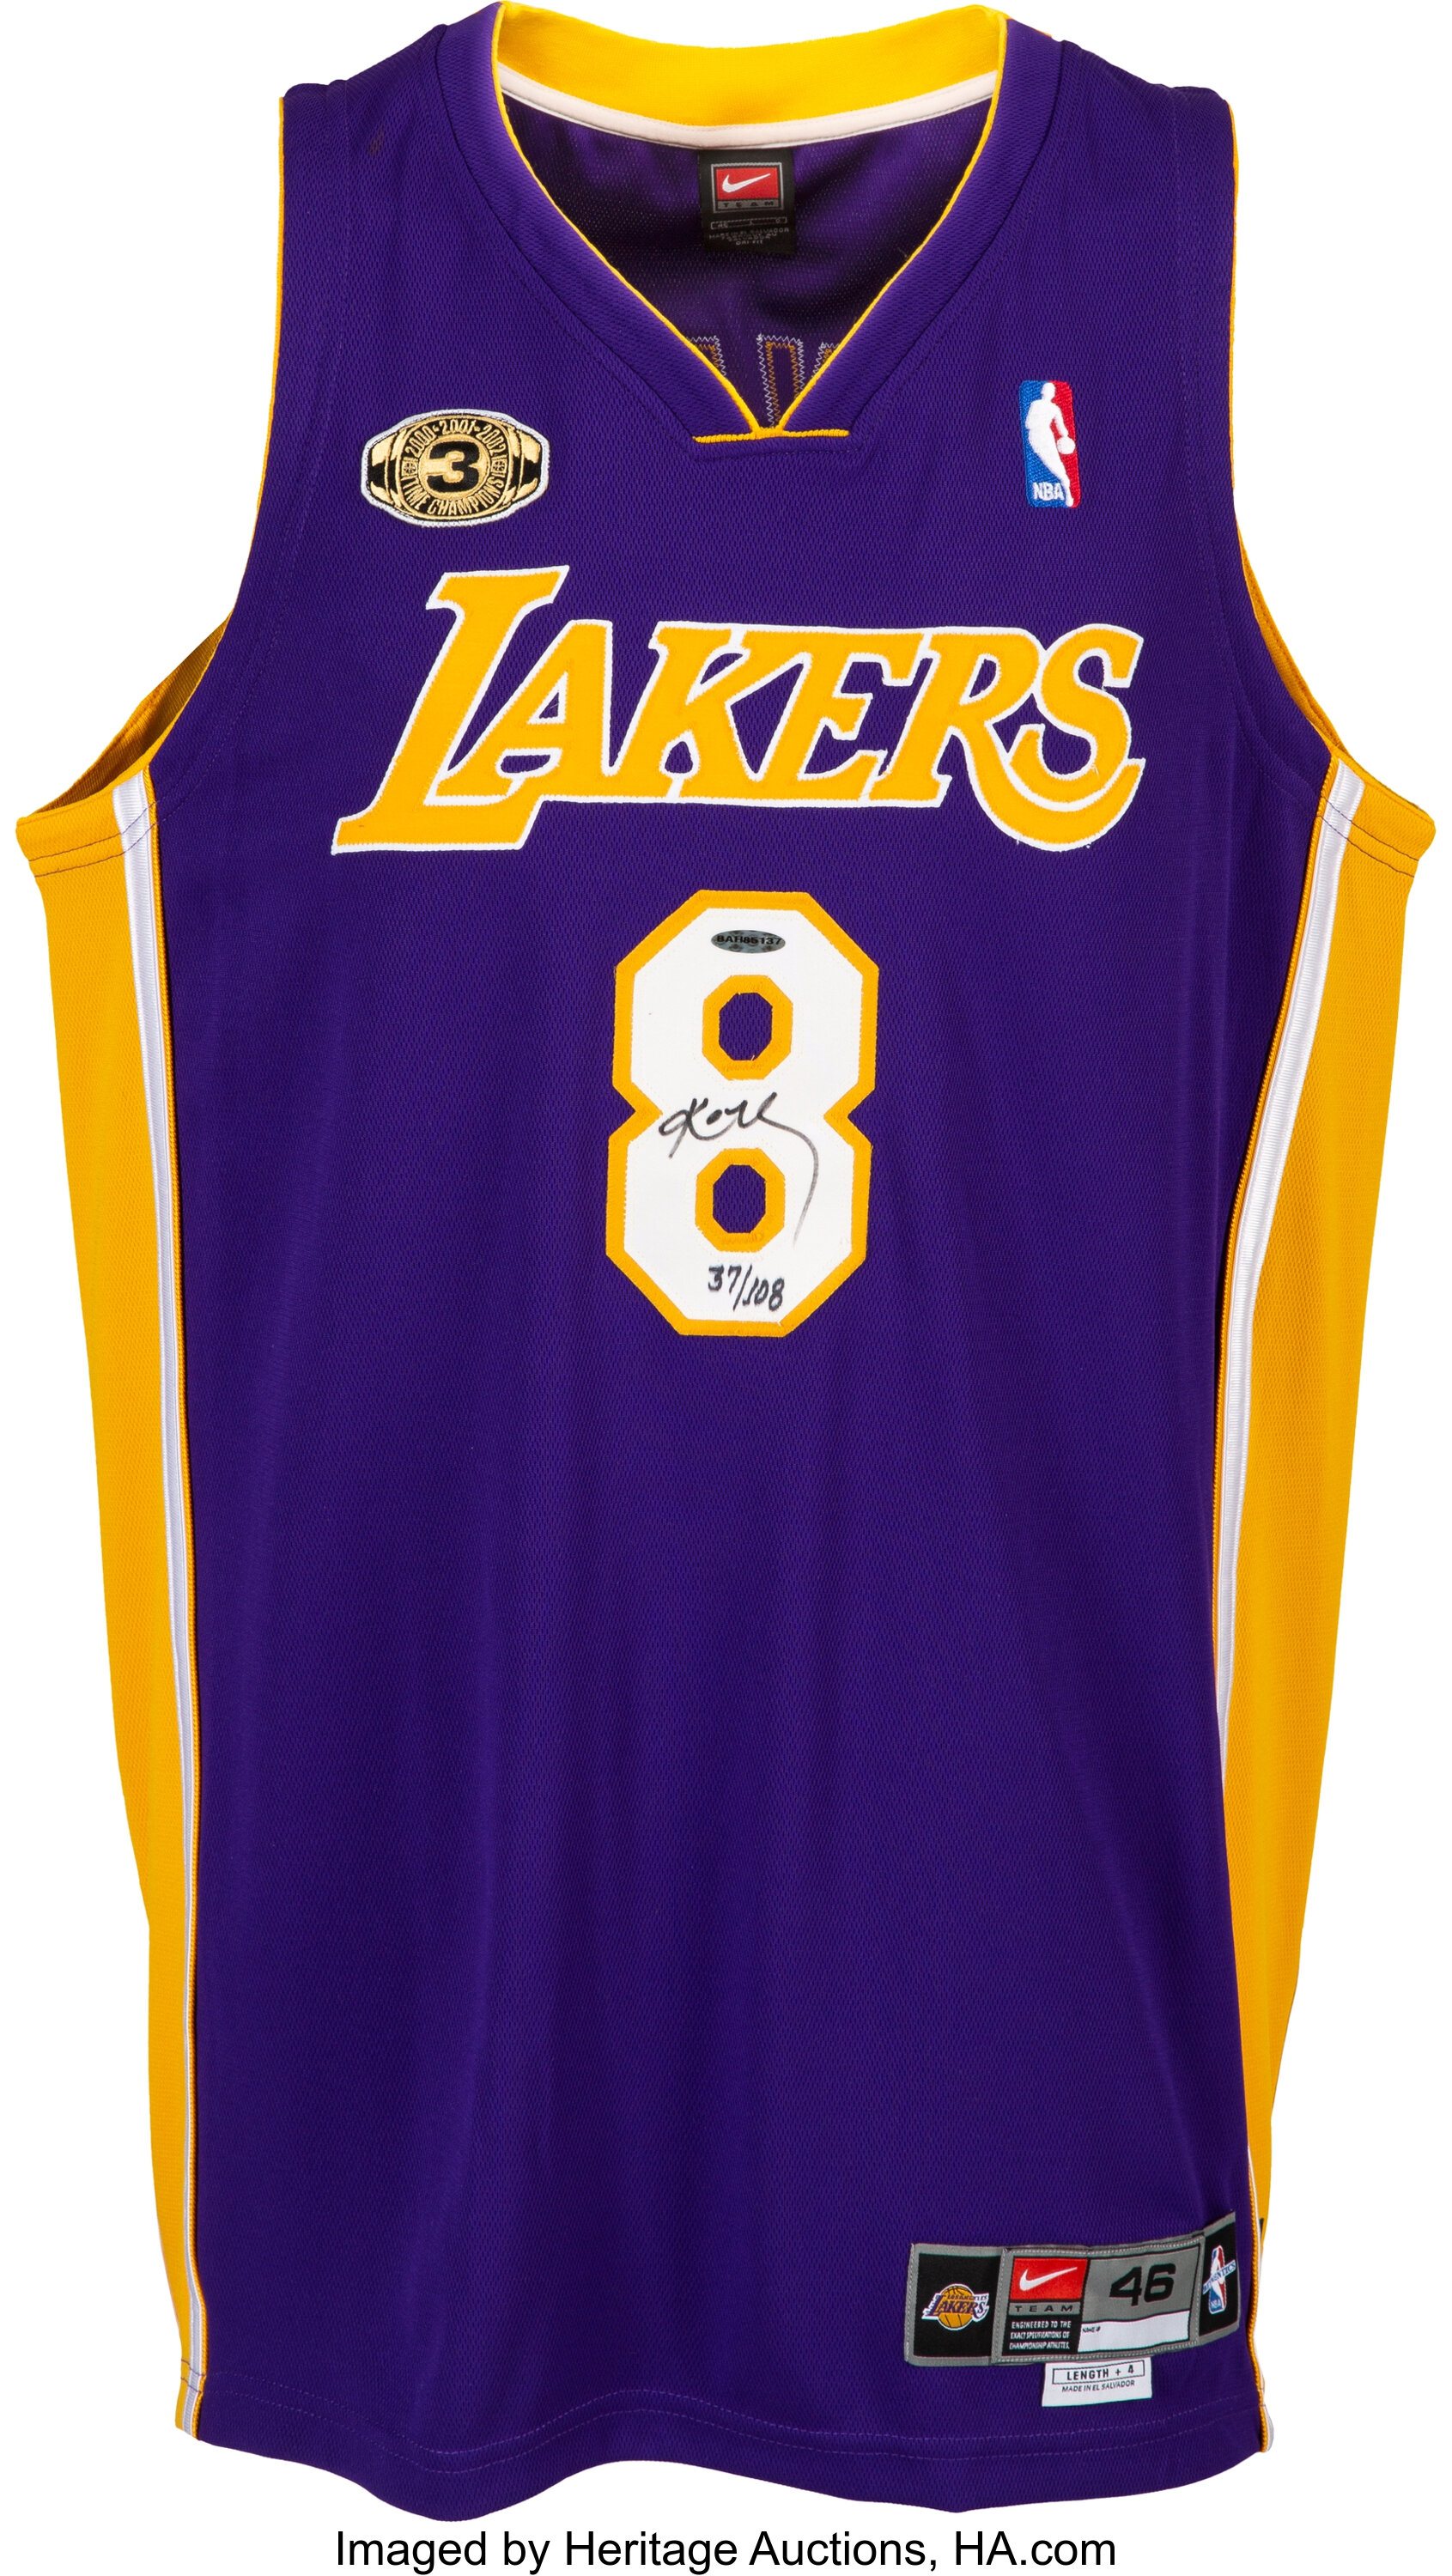 Sold at Auction: KOBE BRYANT SIGNED LOS ANGELES LAKERS JERSEY